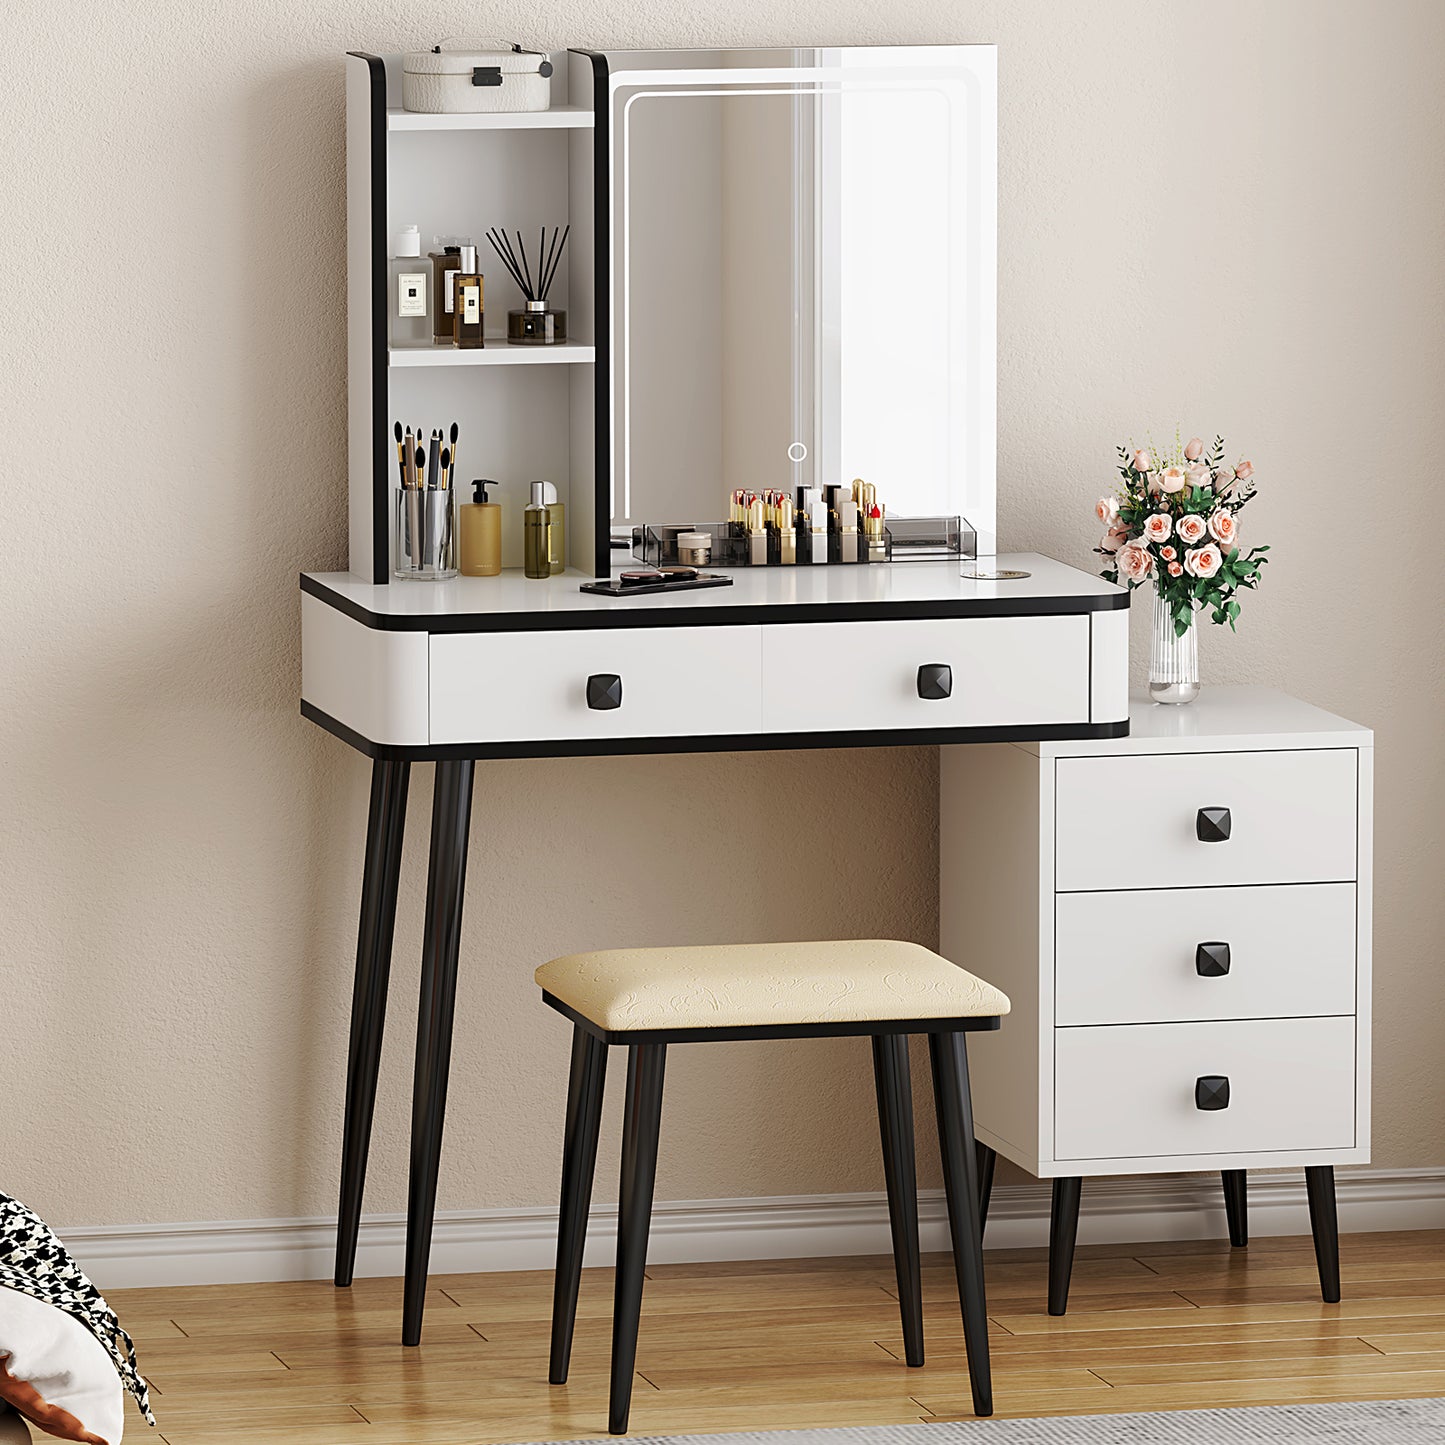 Soges Elegant White Dresser with Square Mirror - Perfect for Christmas, Valentine's Day Gifts, Stylish Design, Solid Wood Frame - Fashion Dresser